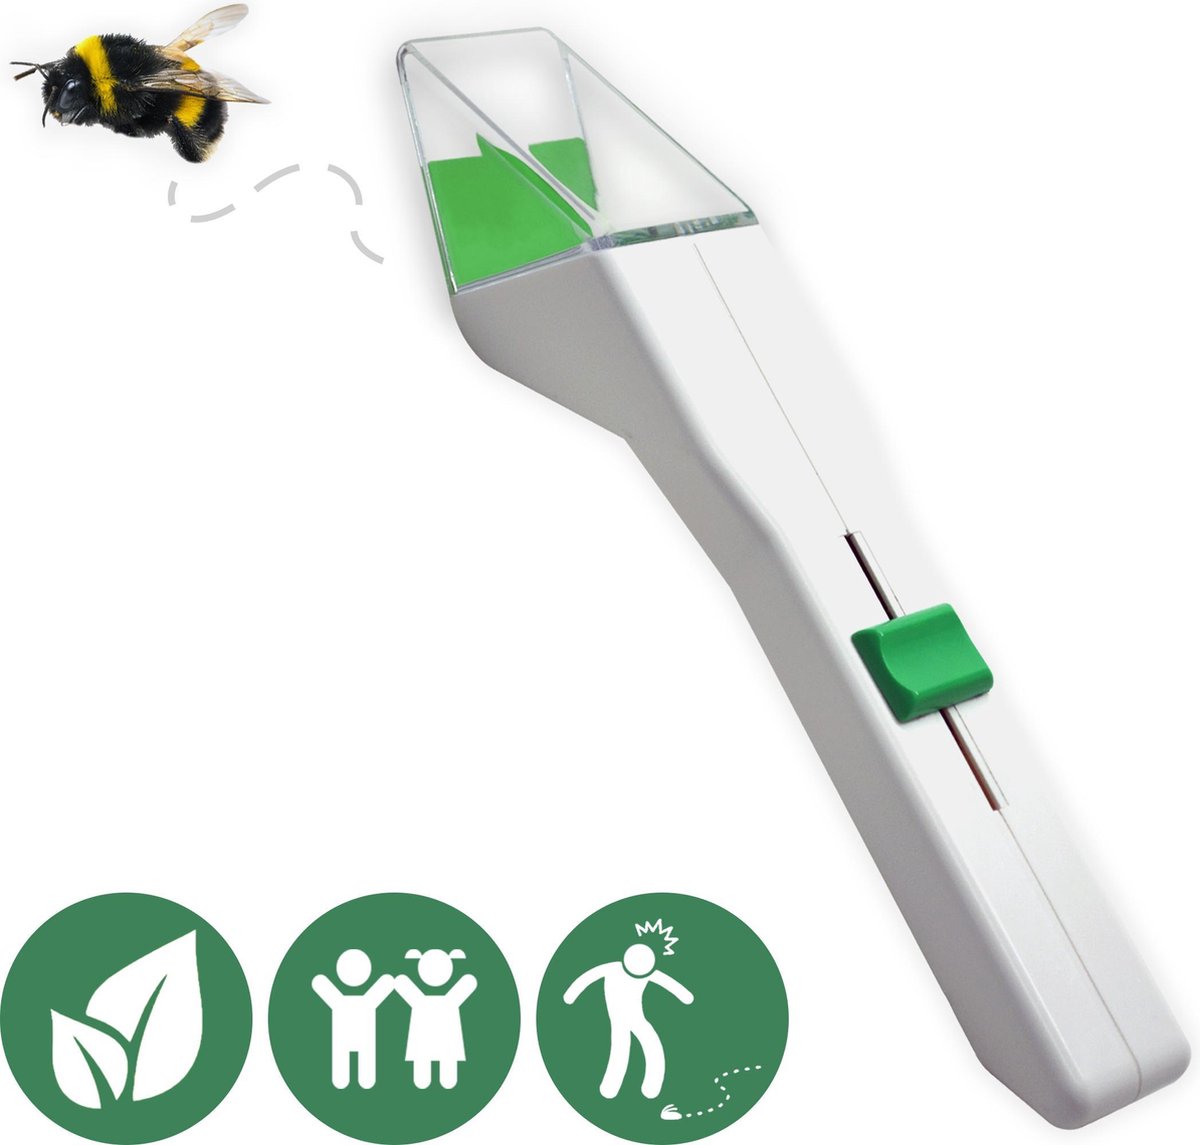 Timto Insect Catcher - Spider Catcher - Insect Control - Spider